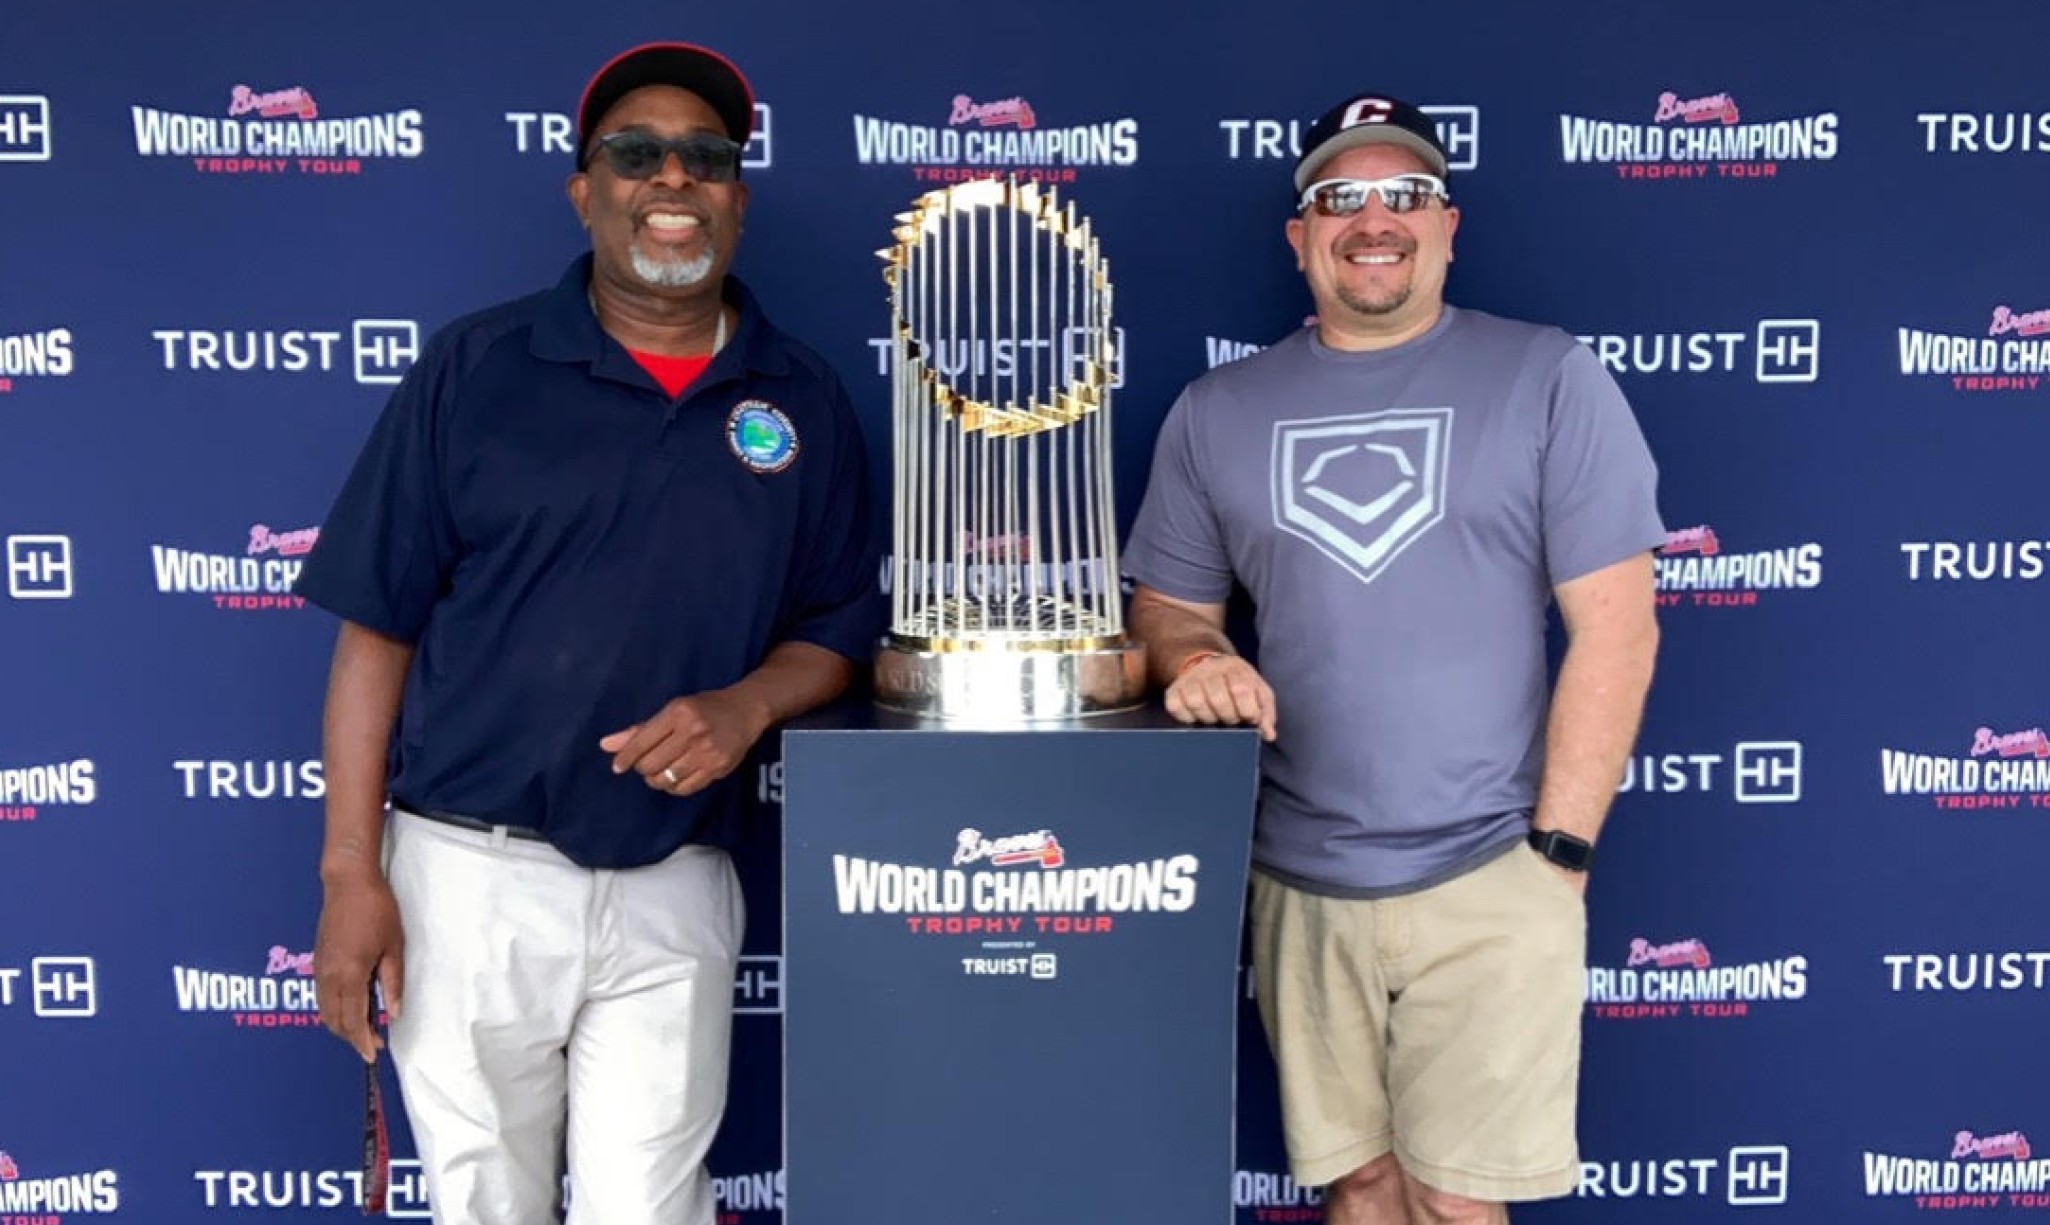 Braves World Series Trophy coming to Savannah for St. Patrick's Day, Saint  Patrick's Day, Savannah News, Events, Restaurants, Music